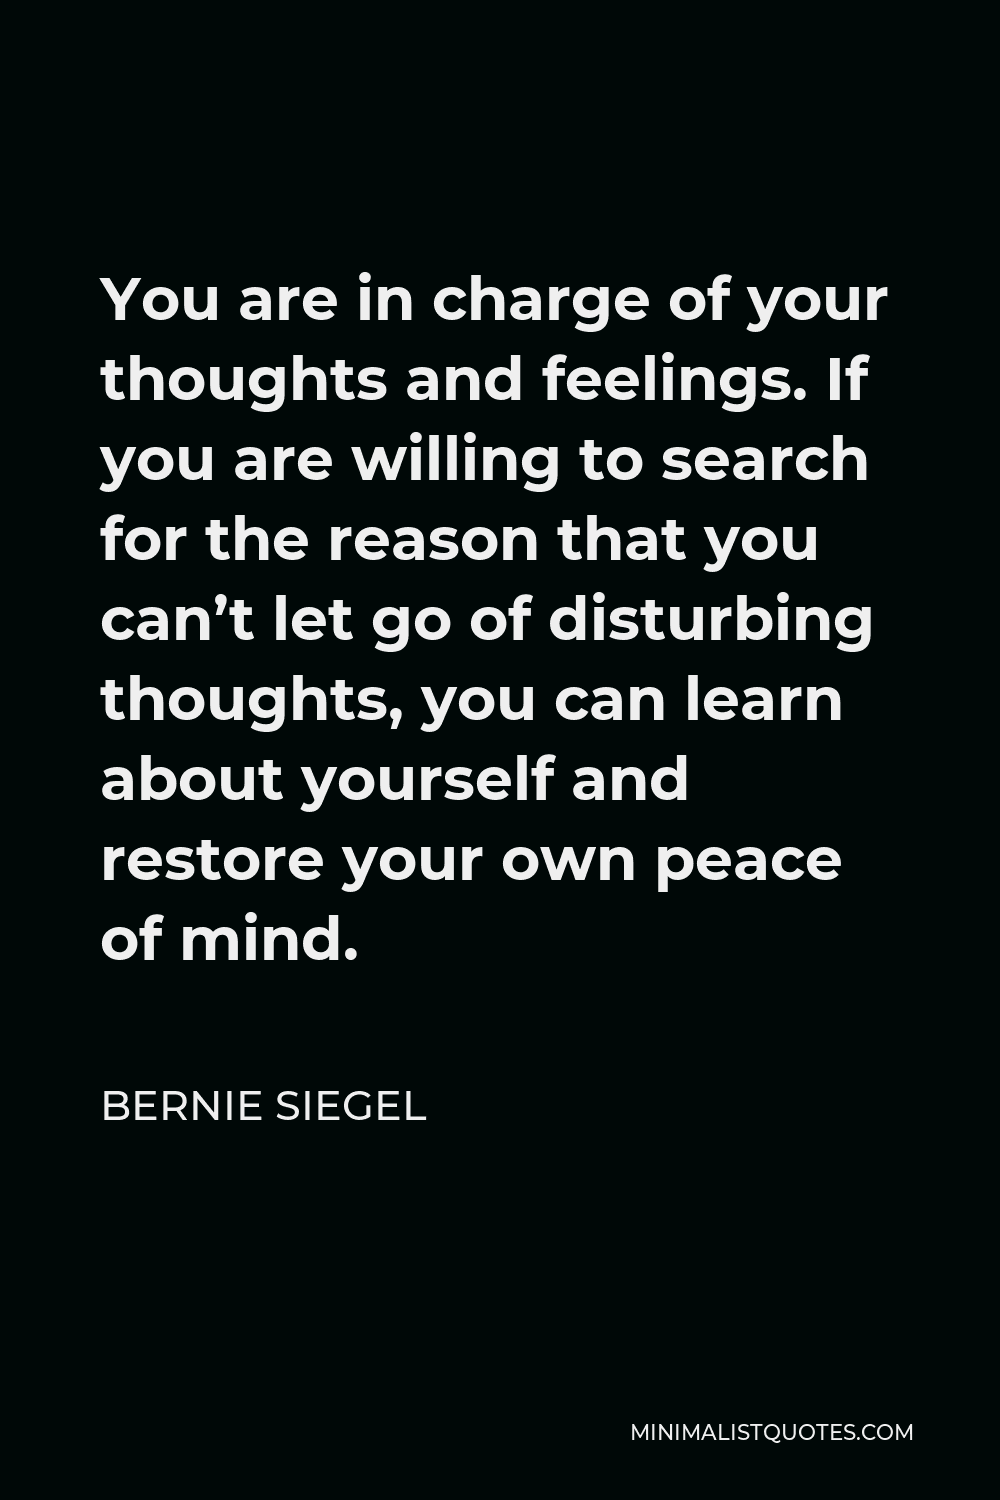 Bernie Siegel Quote - You are in charge of your thoughts and feelings. If you are willing to search for the reason that you can’t let go of disturbing thoughts, you can learn about yourself and restore your own peace of mind.